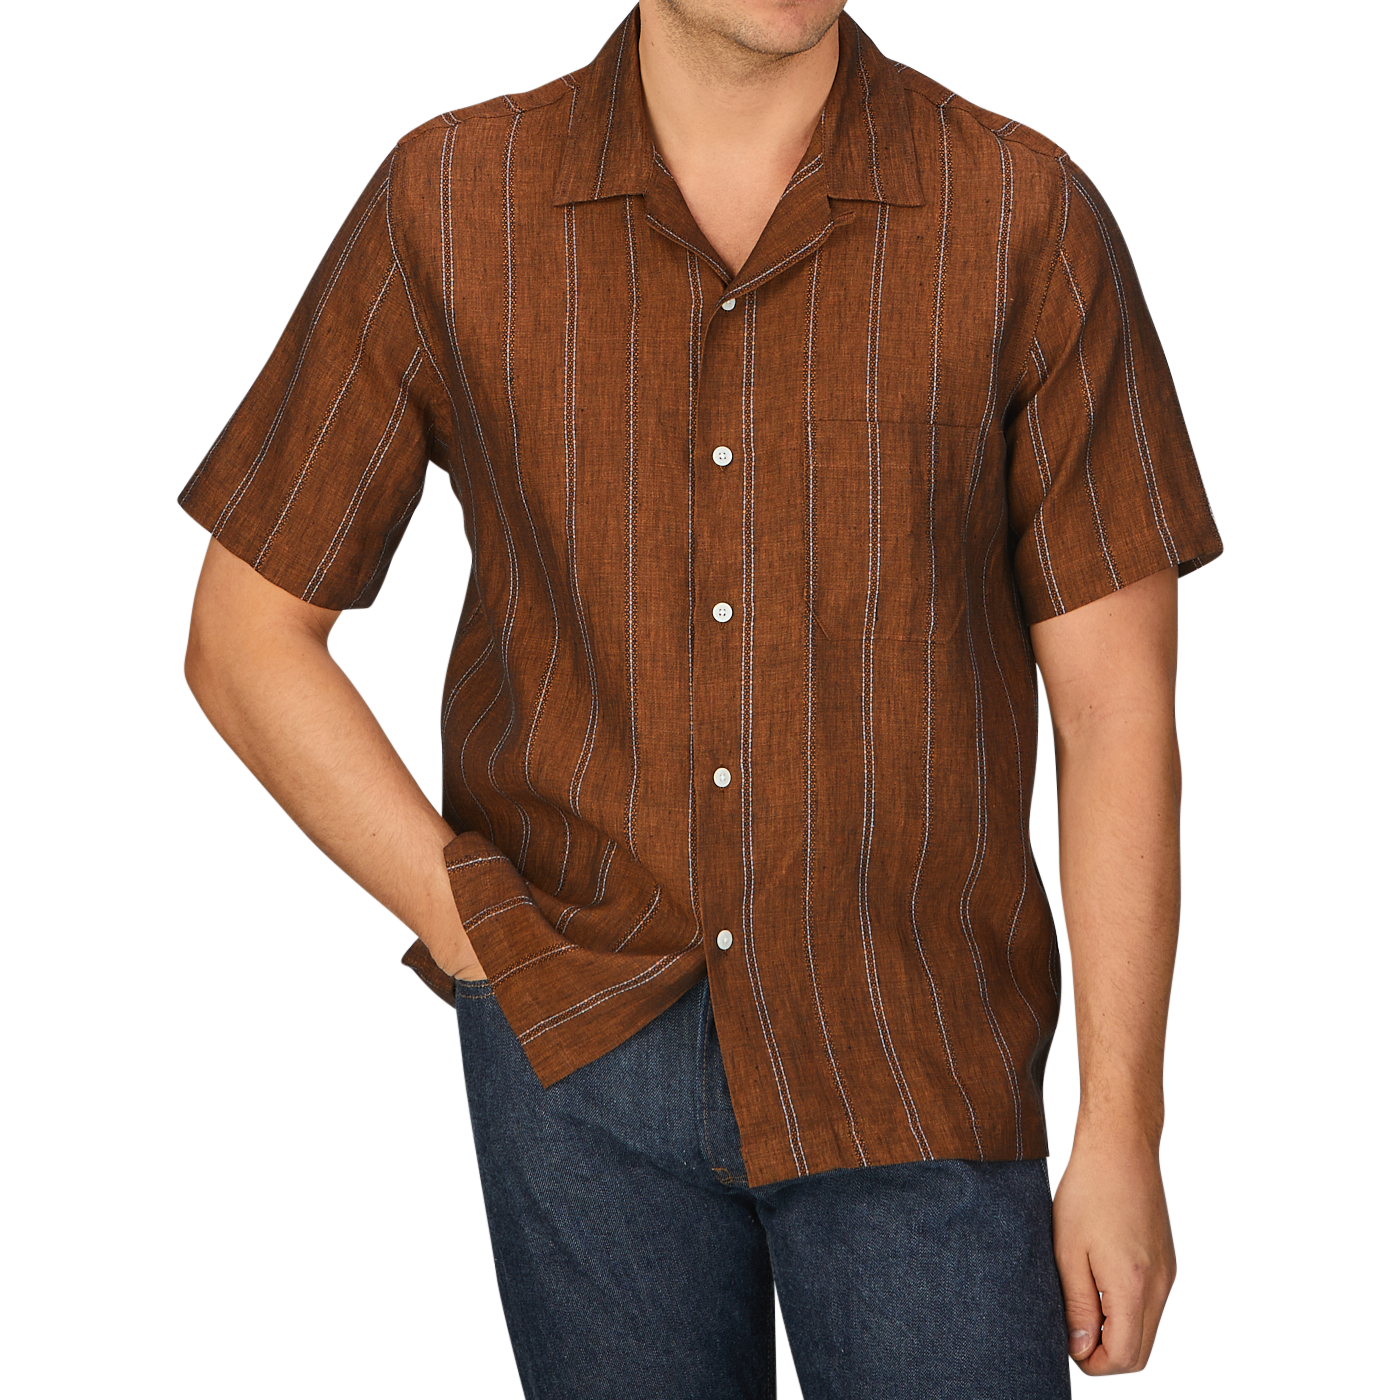 A man wearing a Rust Brown Striped Linen Road Universal Works camp collar shirt and jeans.